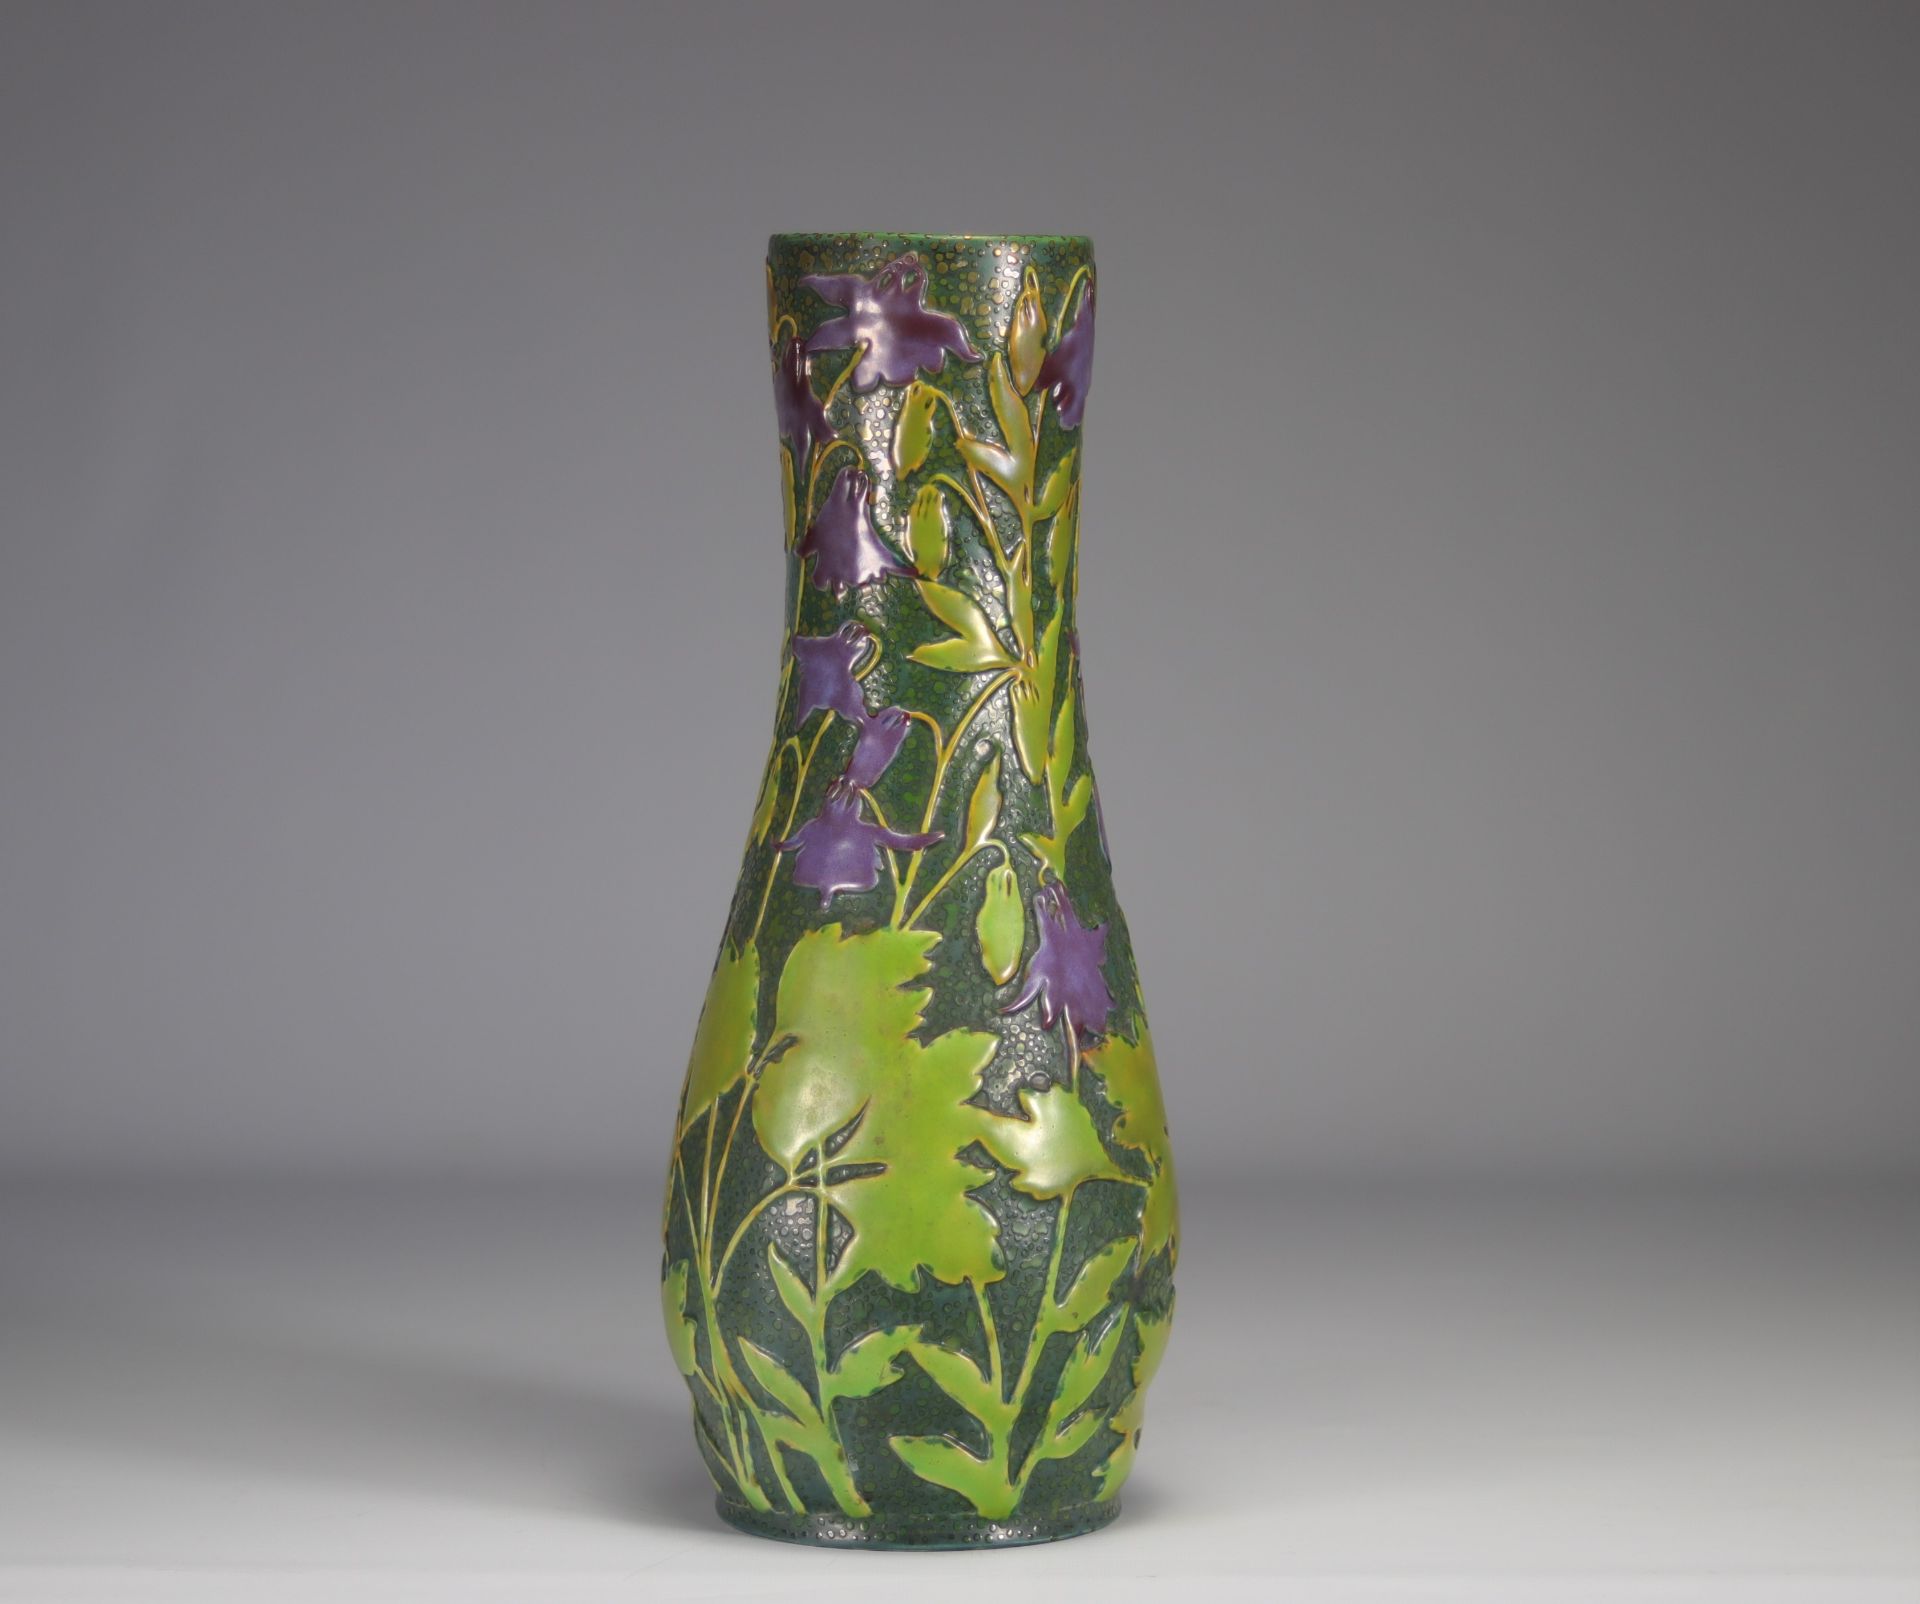 Vilmos ZSOLNAY (1840 - 1900) rare Art Nouveau vase decorated with purple flowers on a green backgrou - Image 3 of 6